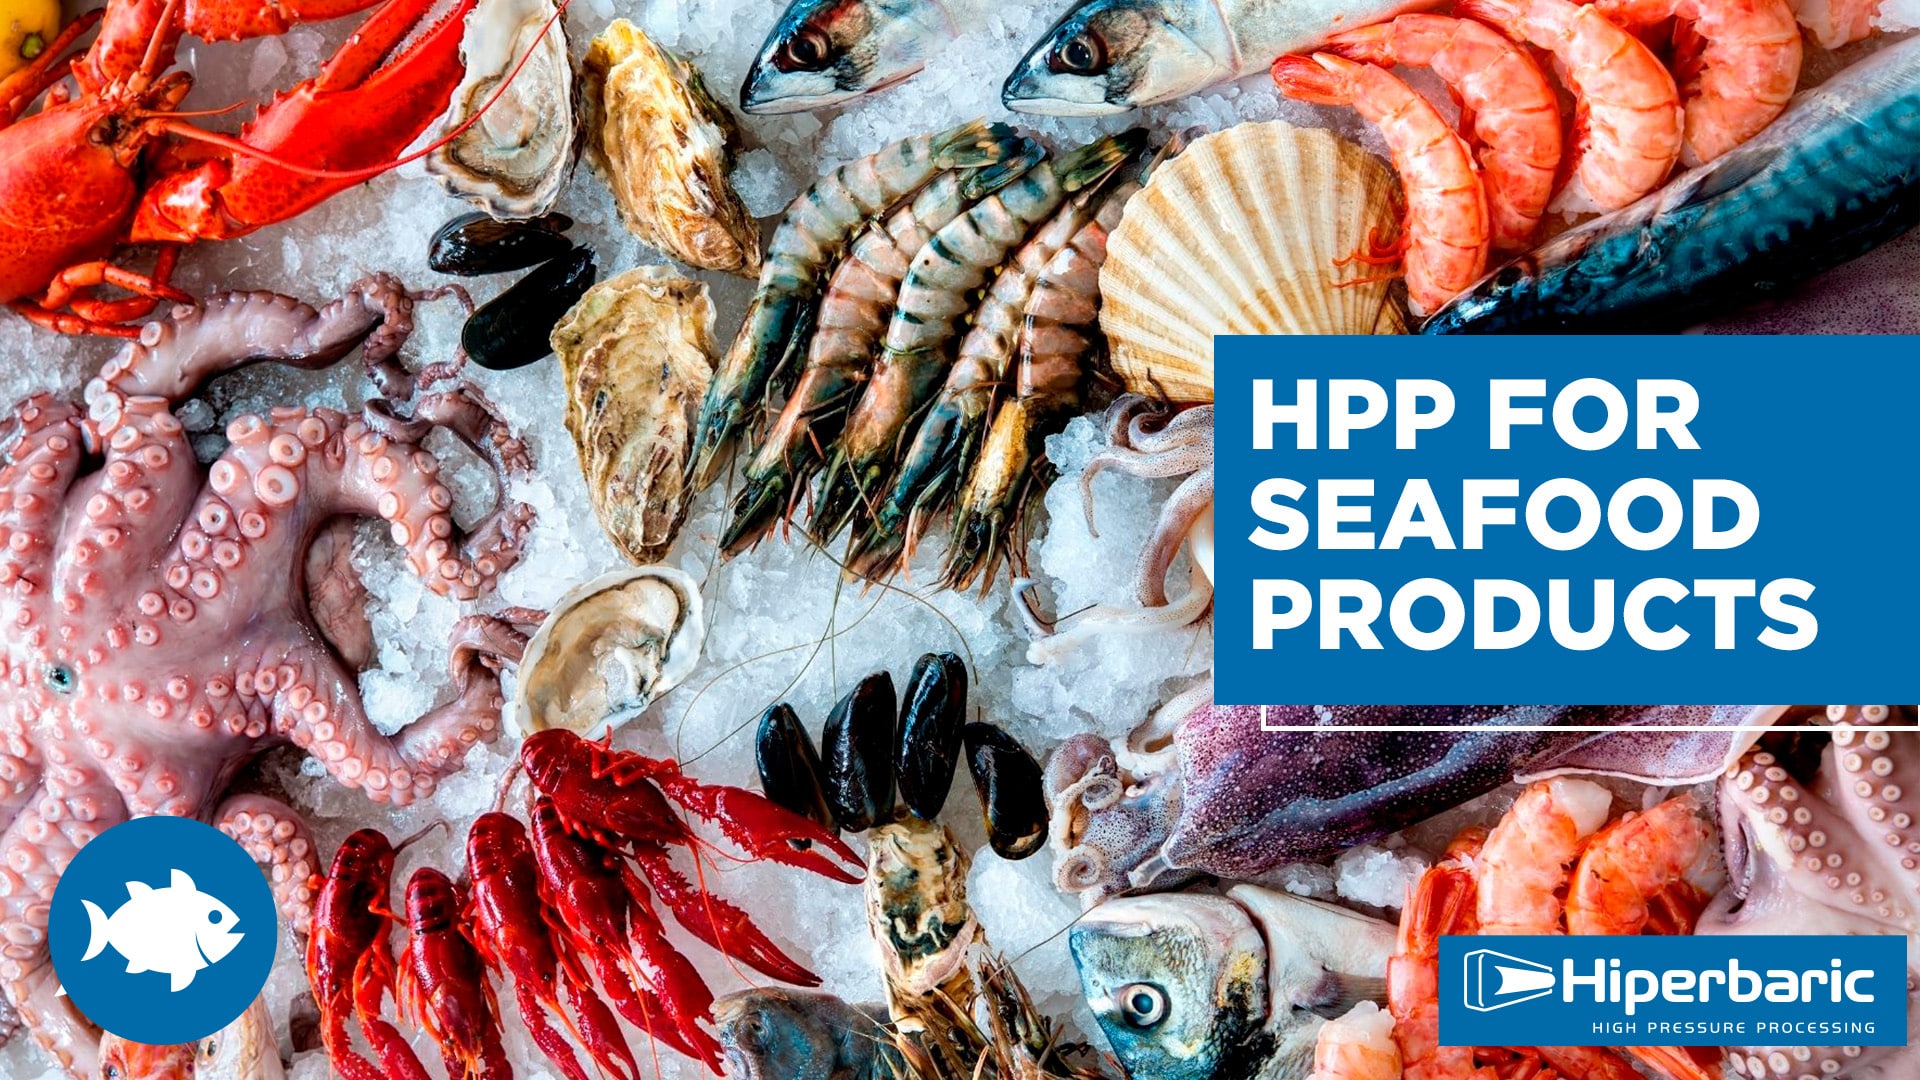 HPP for Seafood Products